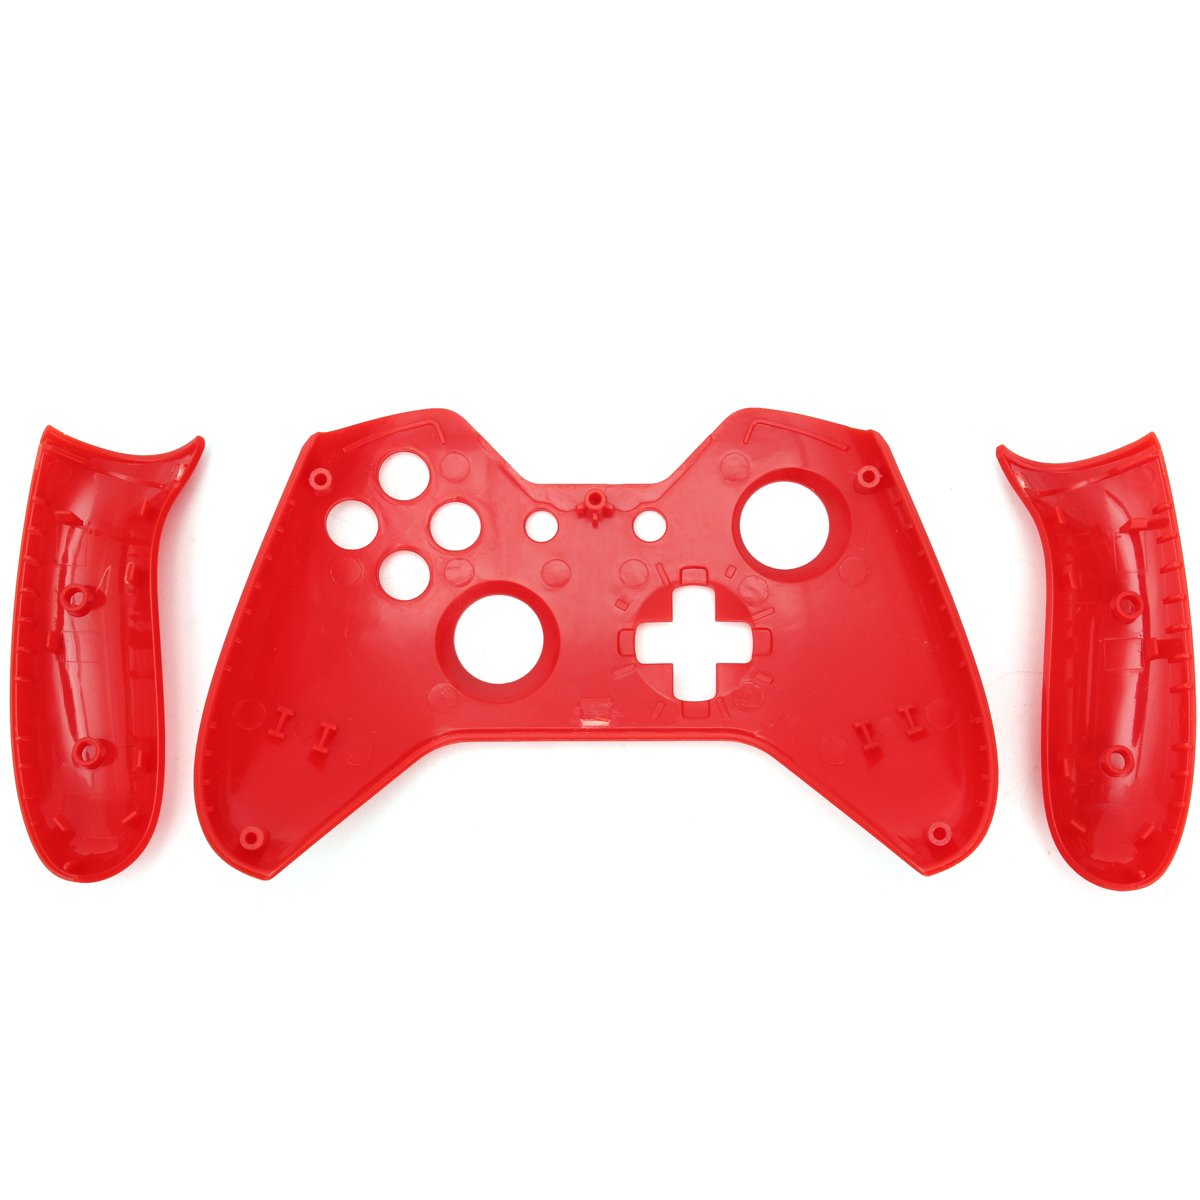 Soft Touch Front Housing Shell Faceplate Replacement for Xbox One Controller 1